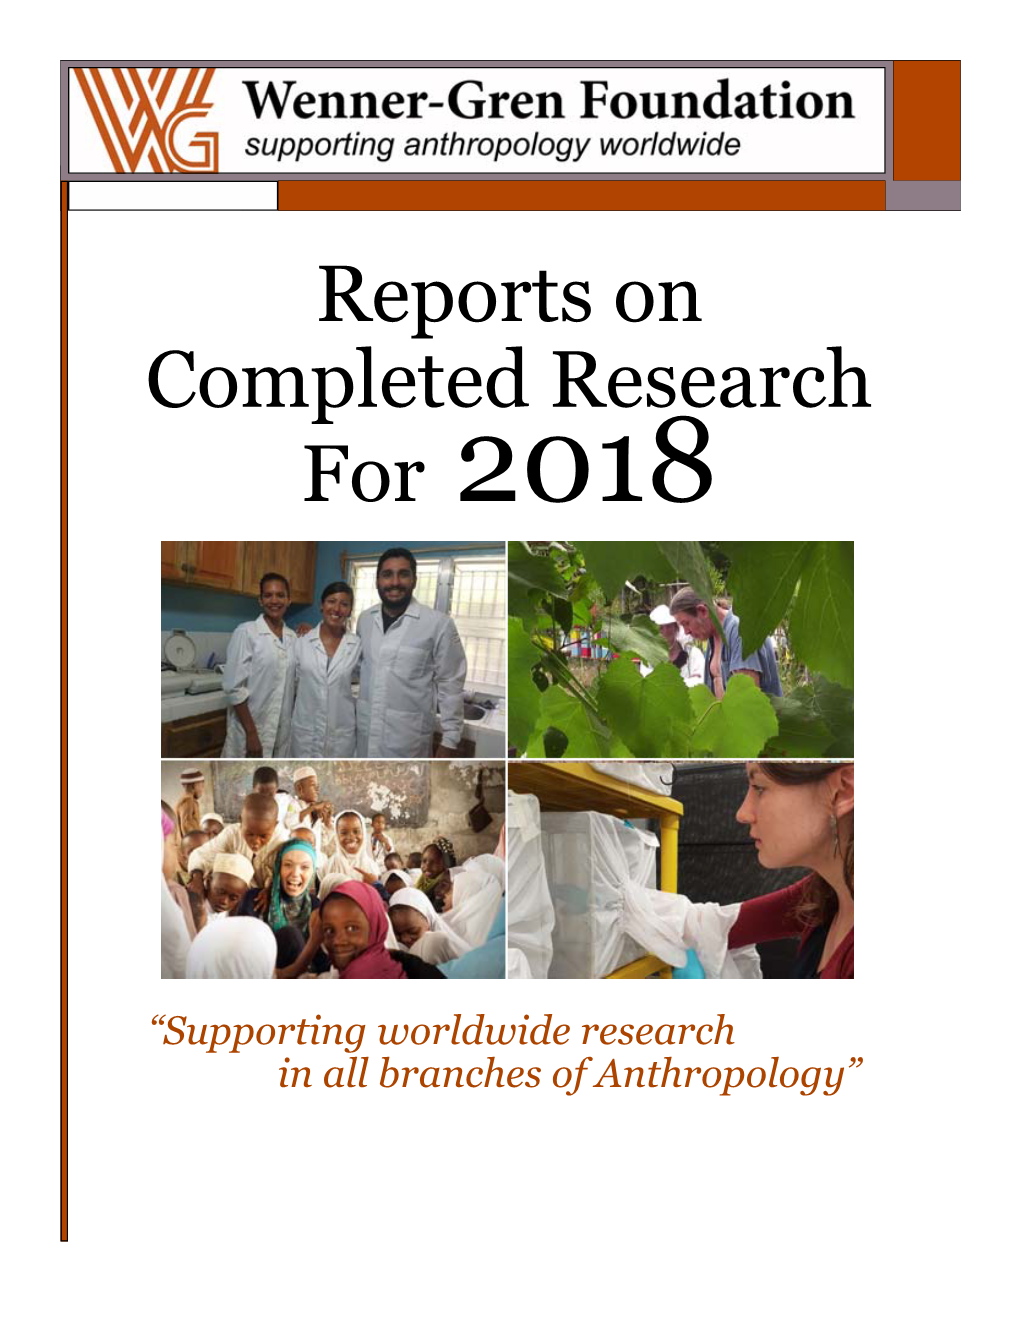 Reports on Completed Research for 2018